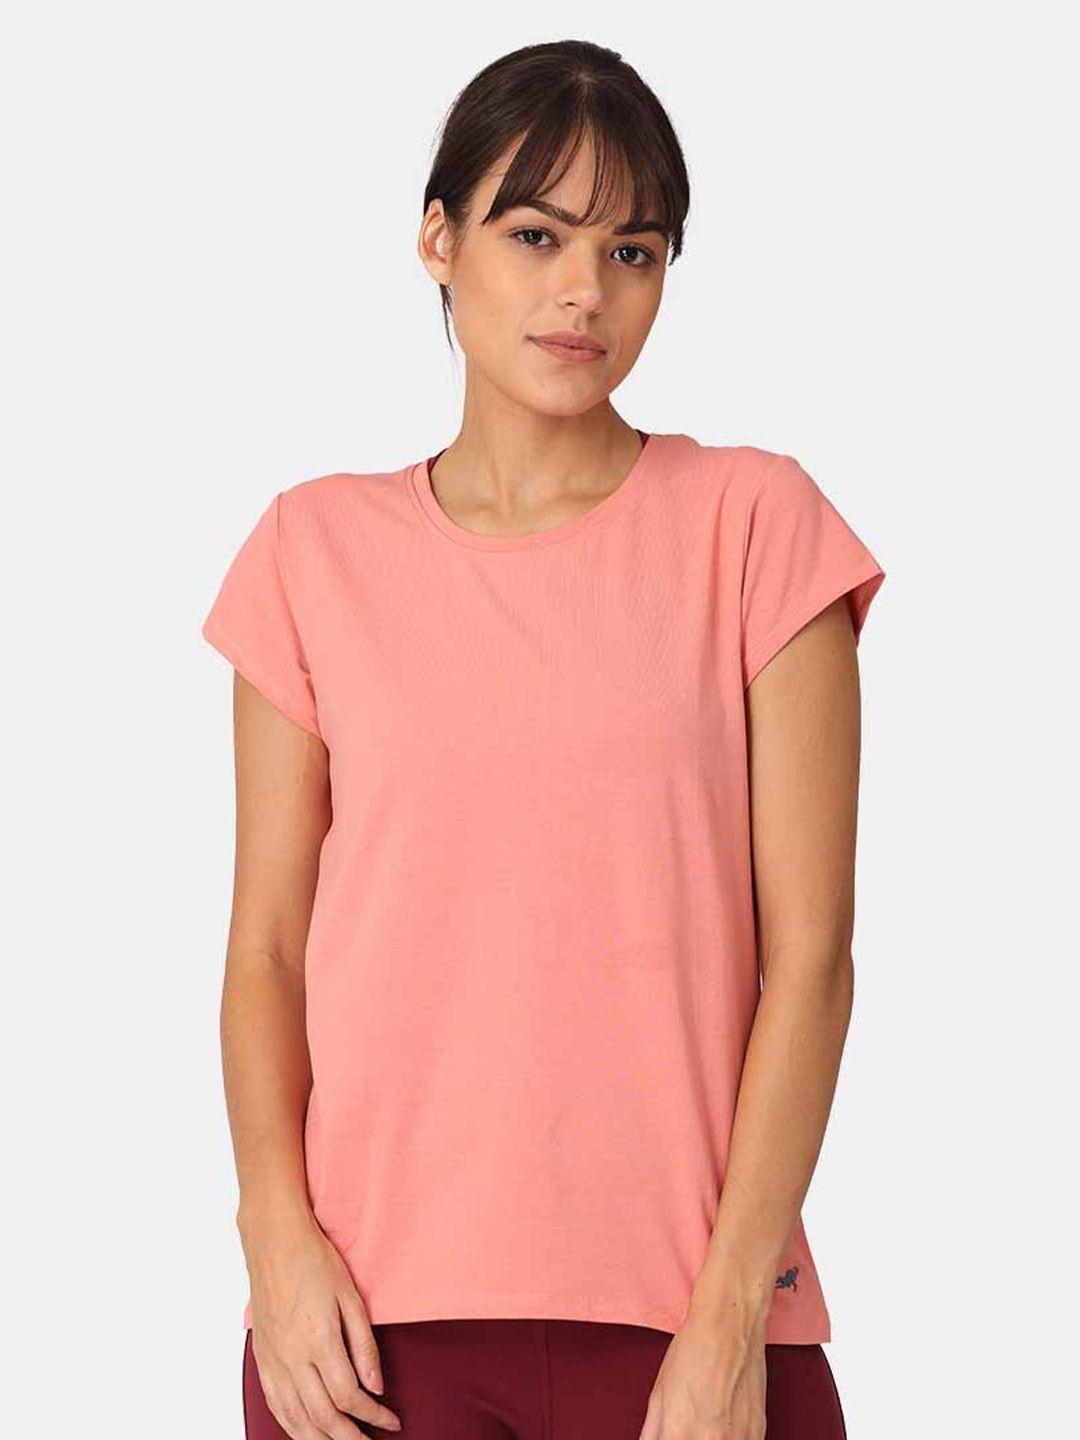 proyog women peach-colored bamboo solid yoga top